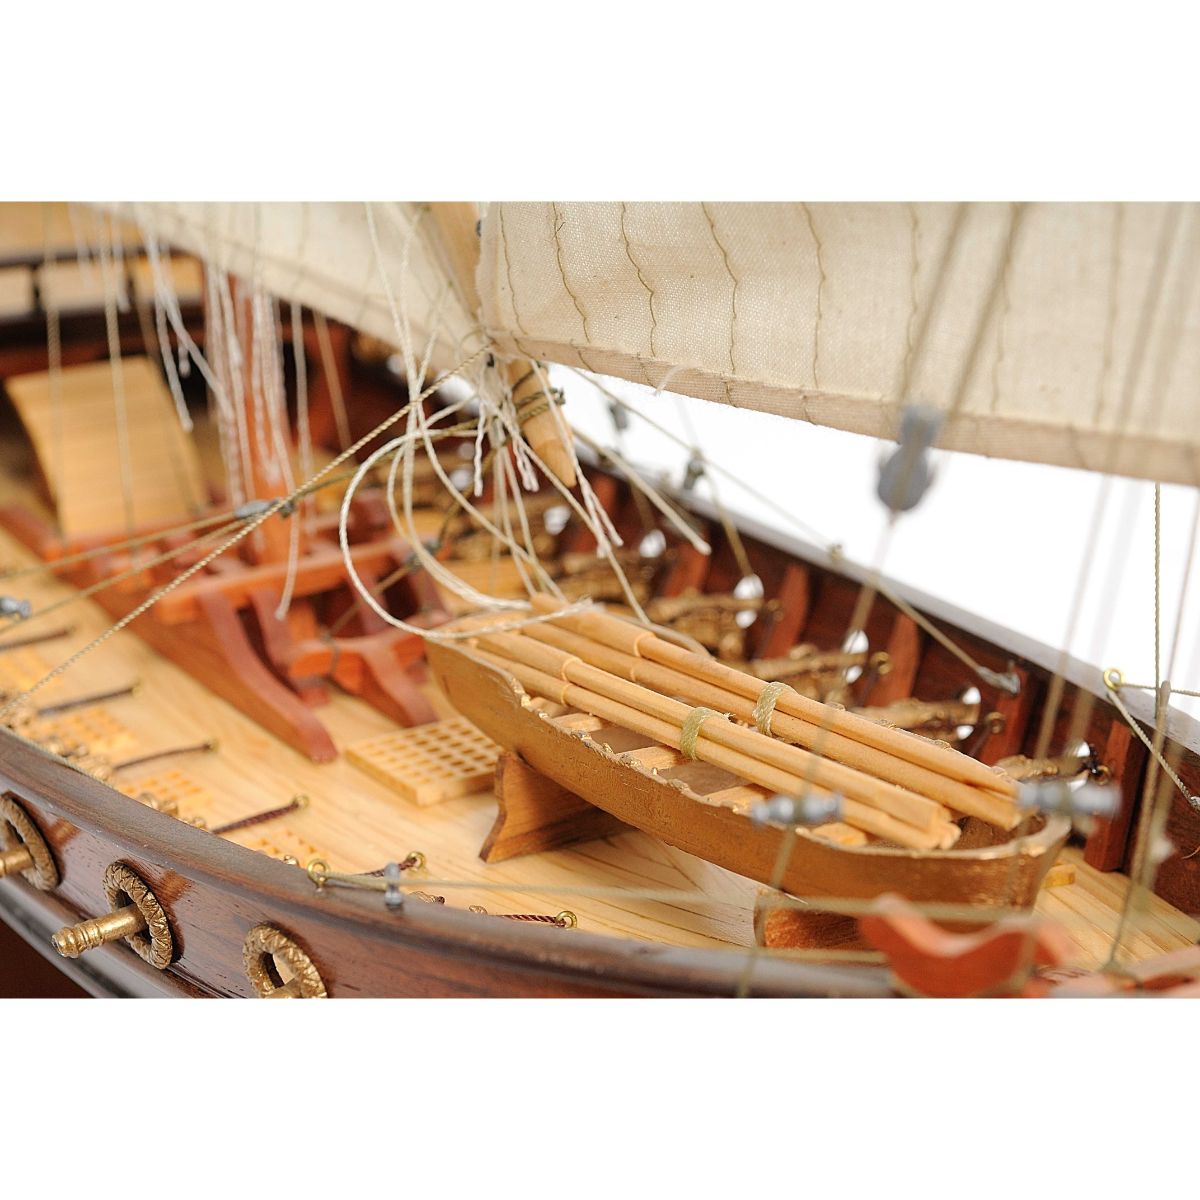 Wooden Awning Boat Gifts Statues Ship Model Mini Rowboat Kids Toy Crafts for